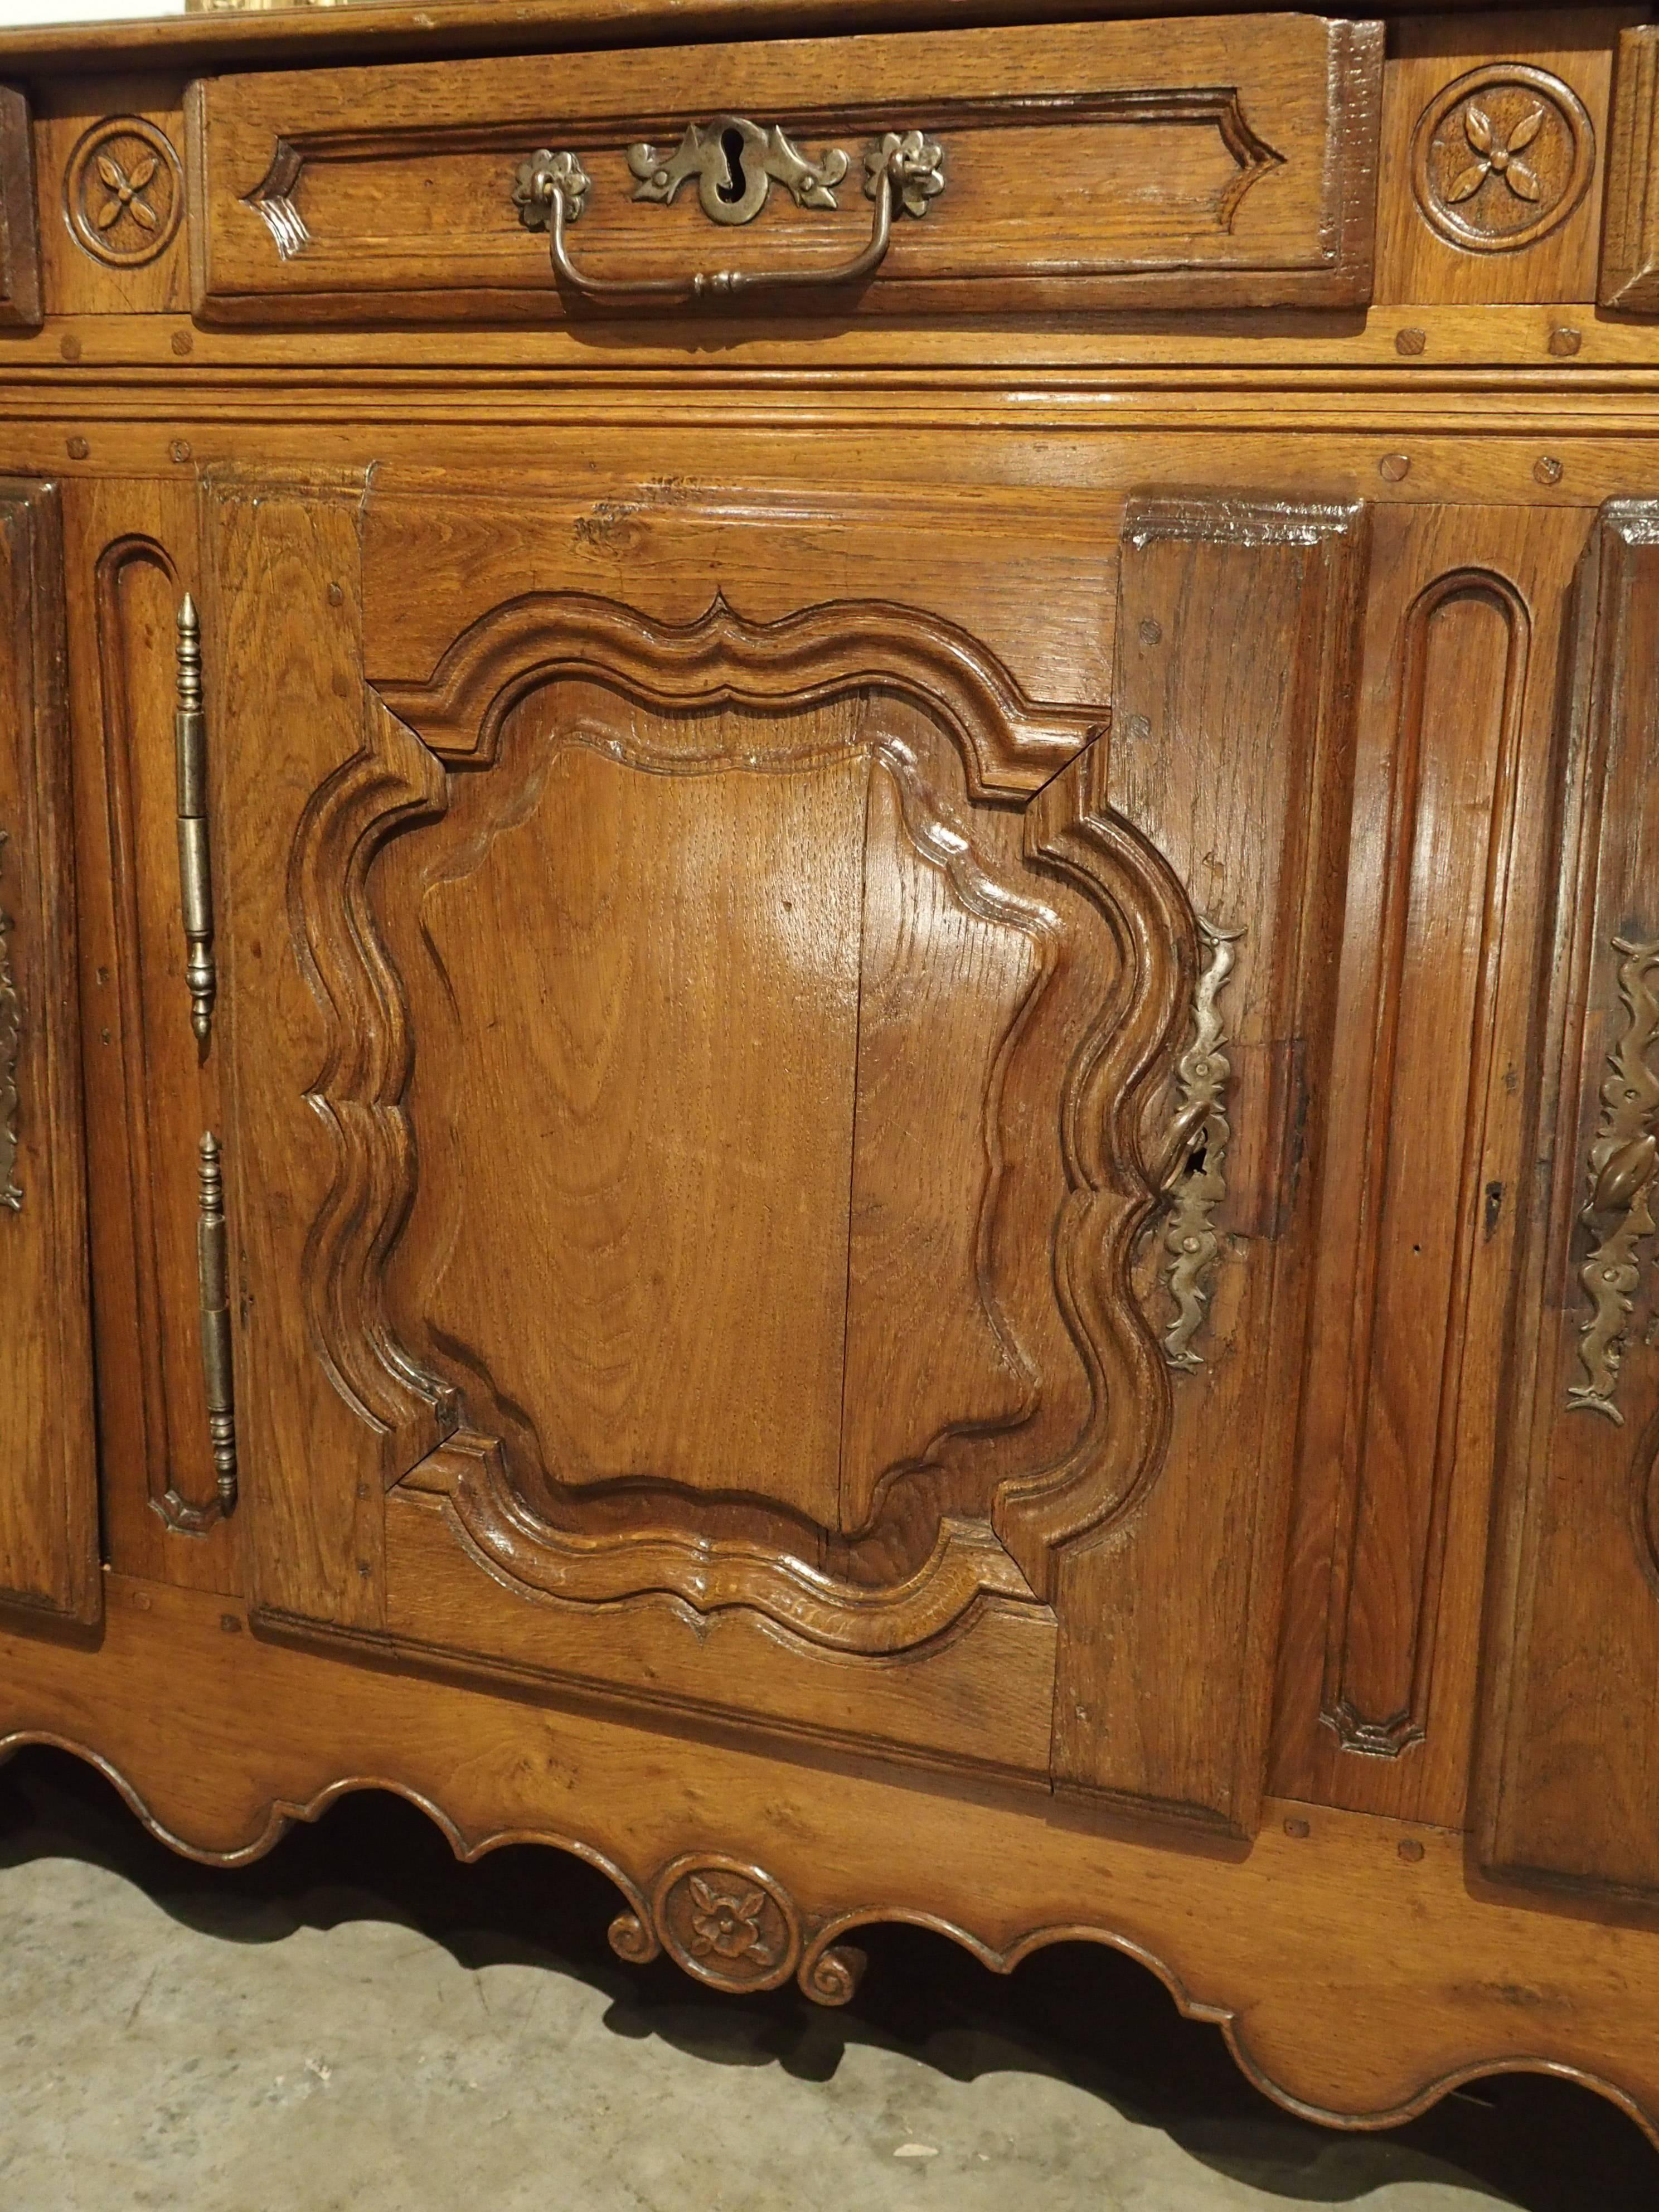 French Provincial Antique Oak Enfilade from Lorraine France, 1700s